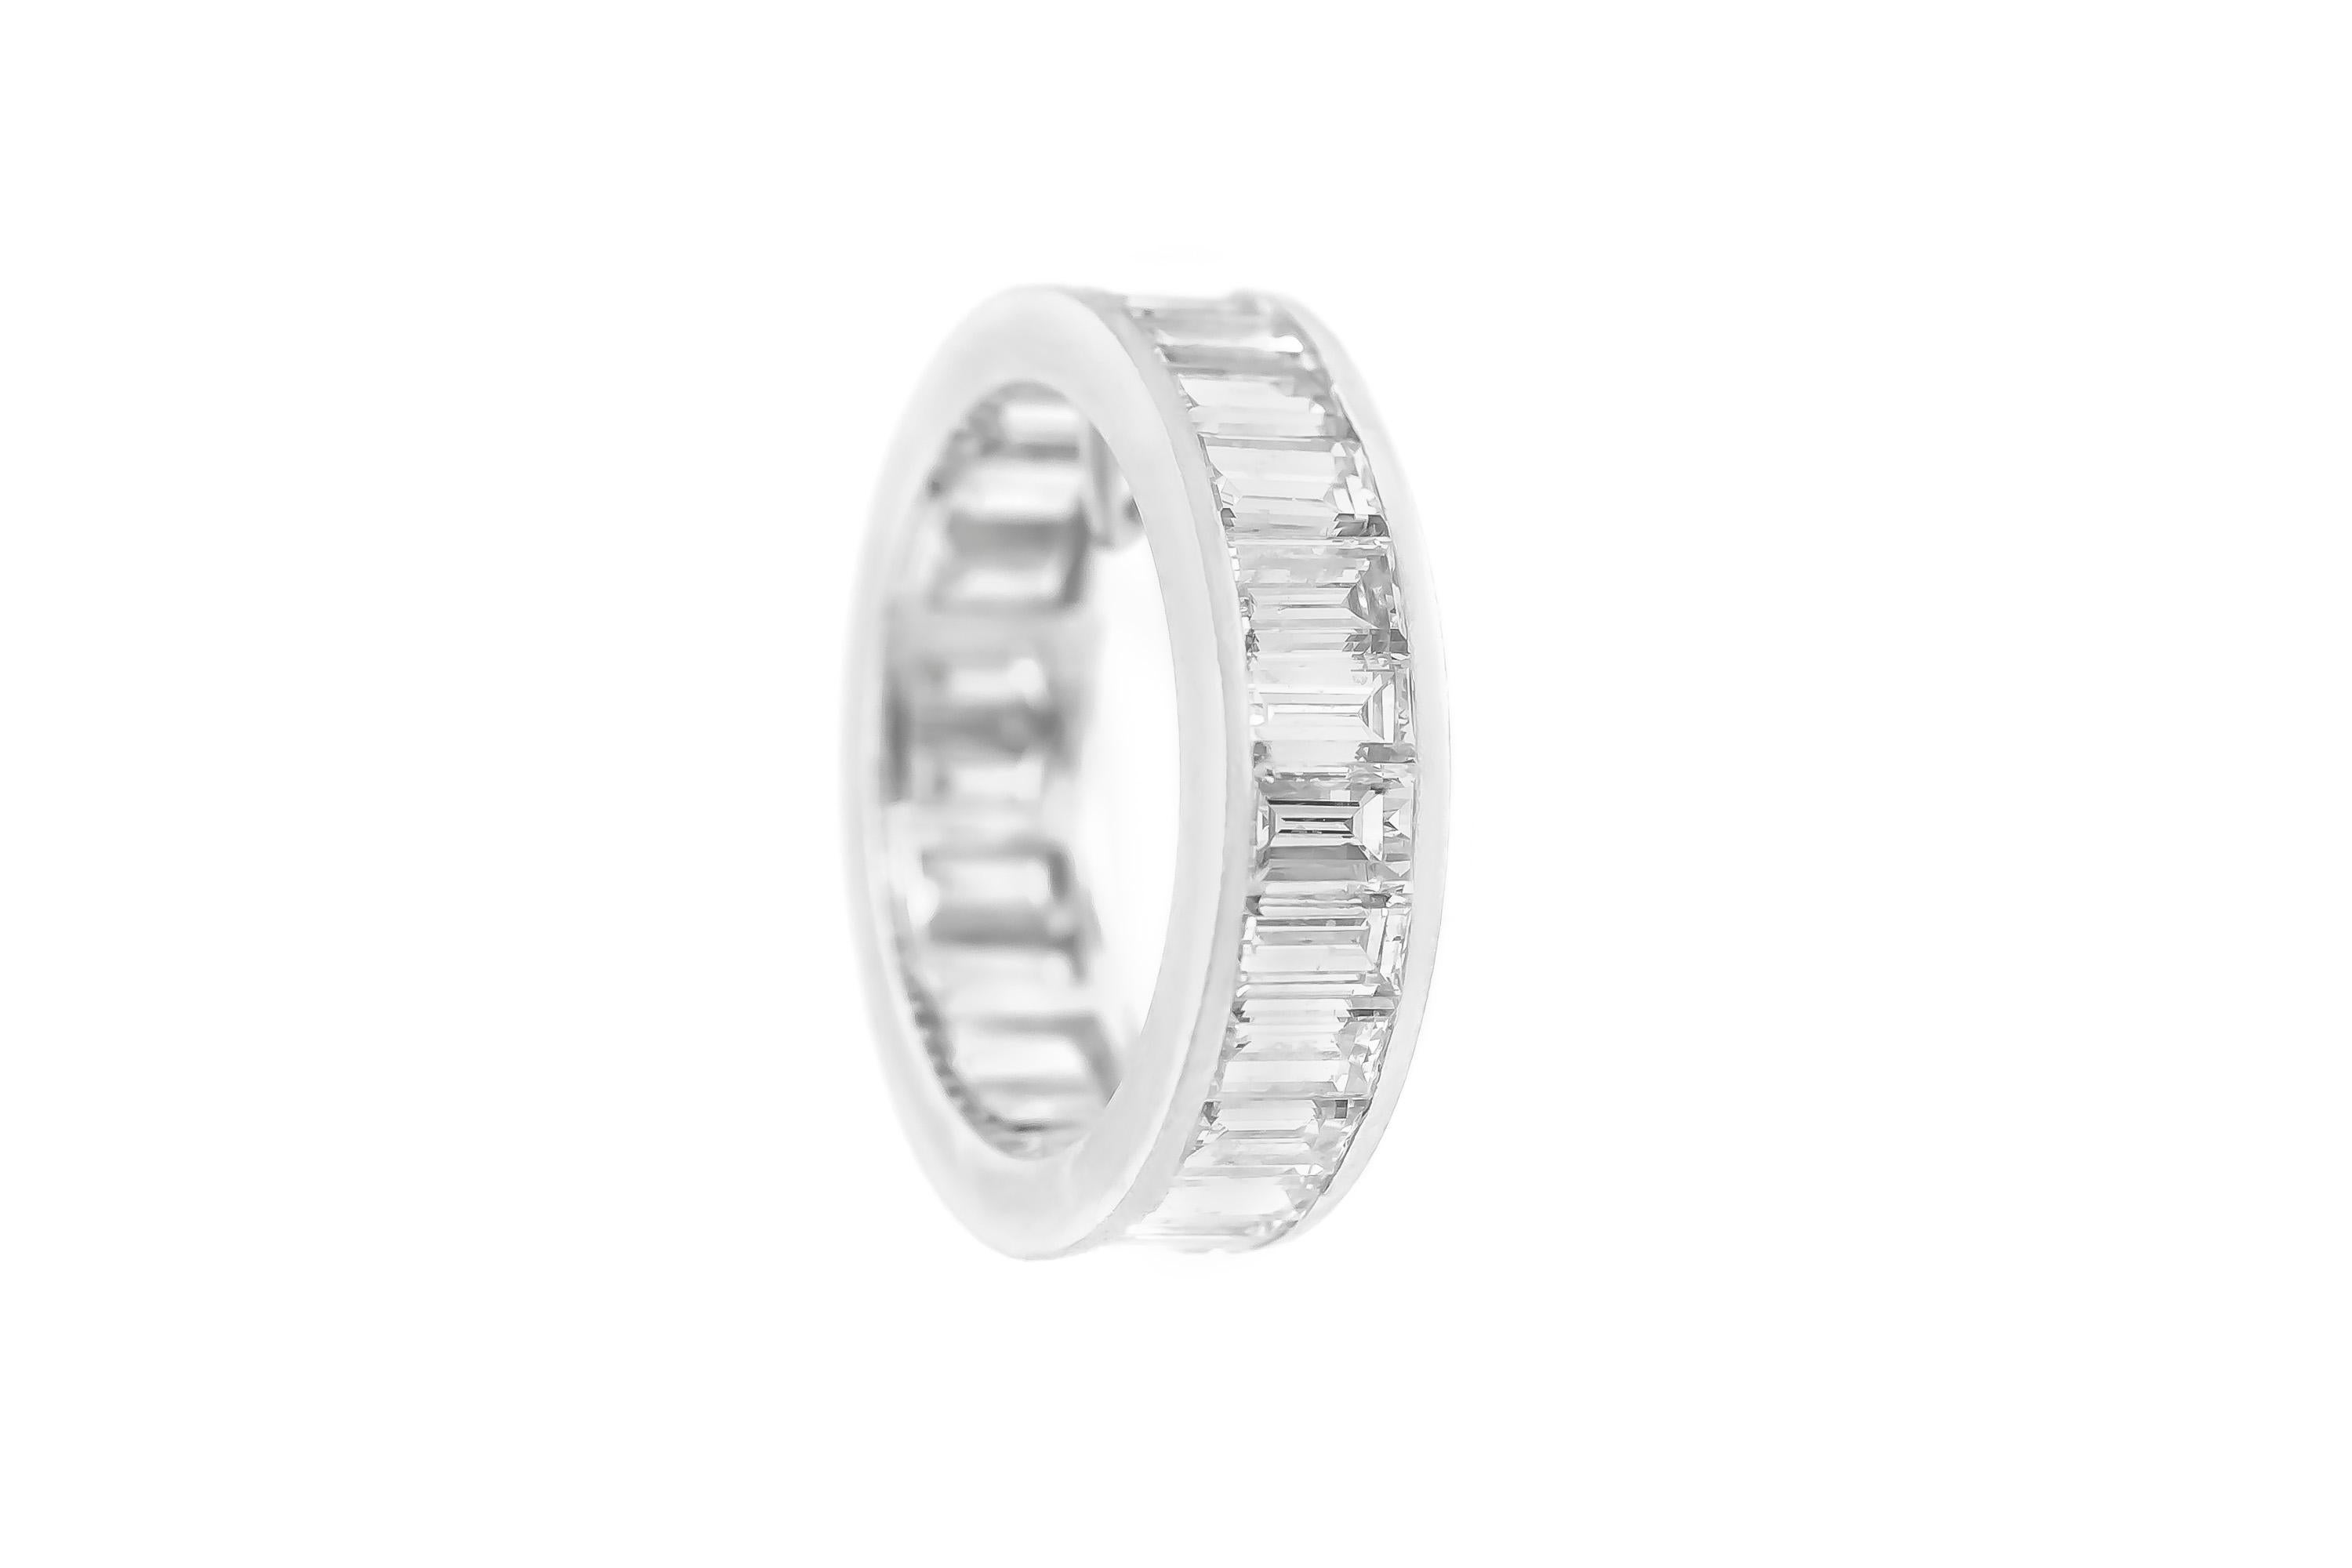 The ring is finely crafted in platinum with diamonds weighing approximately total of 4.00.
